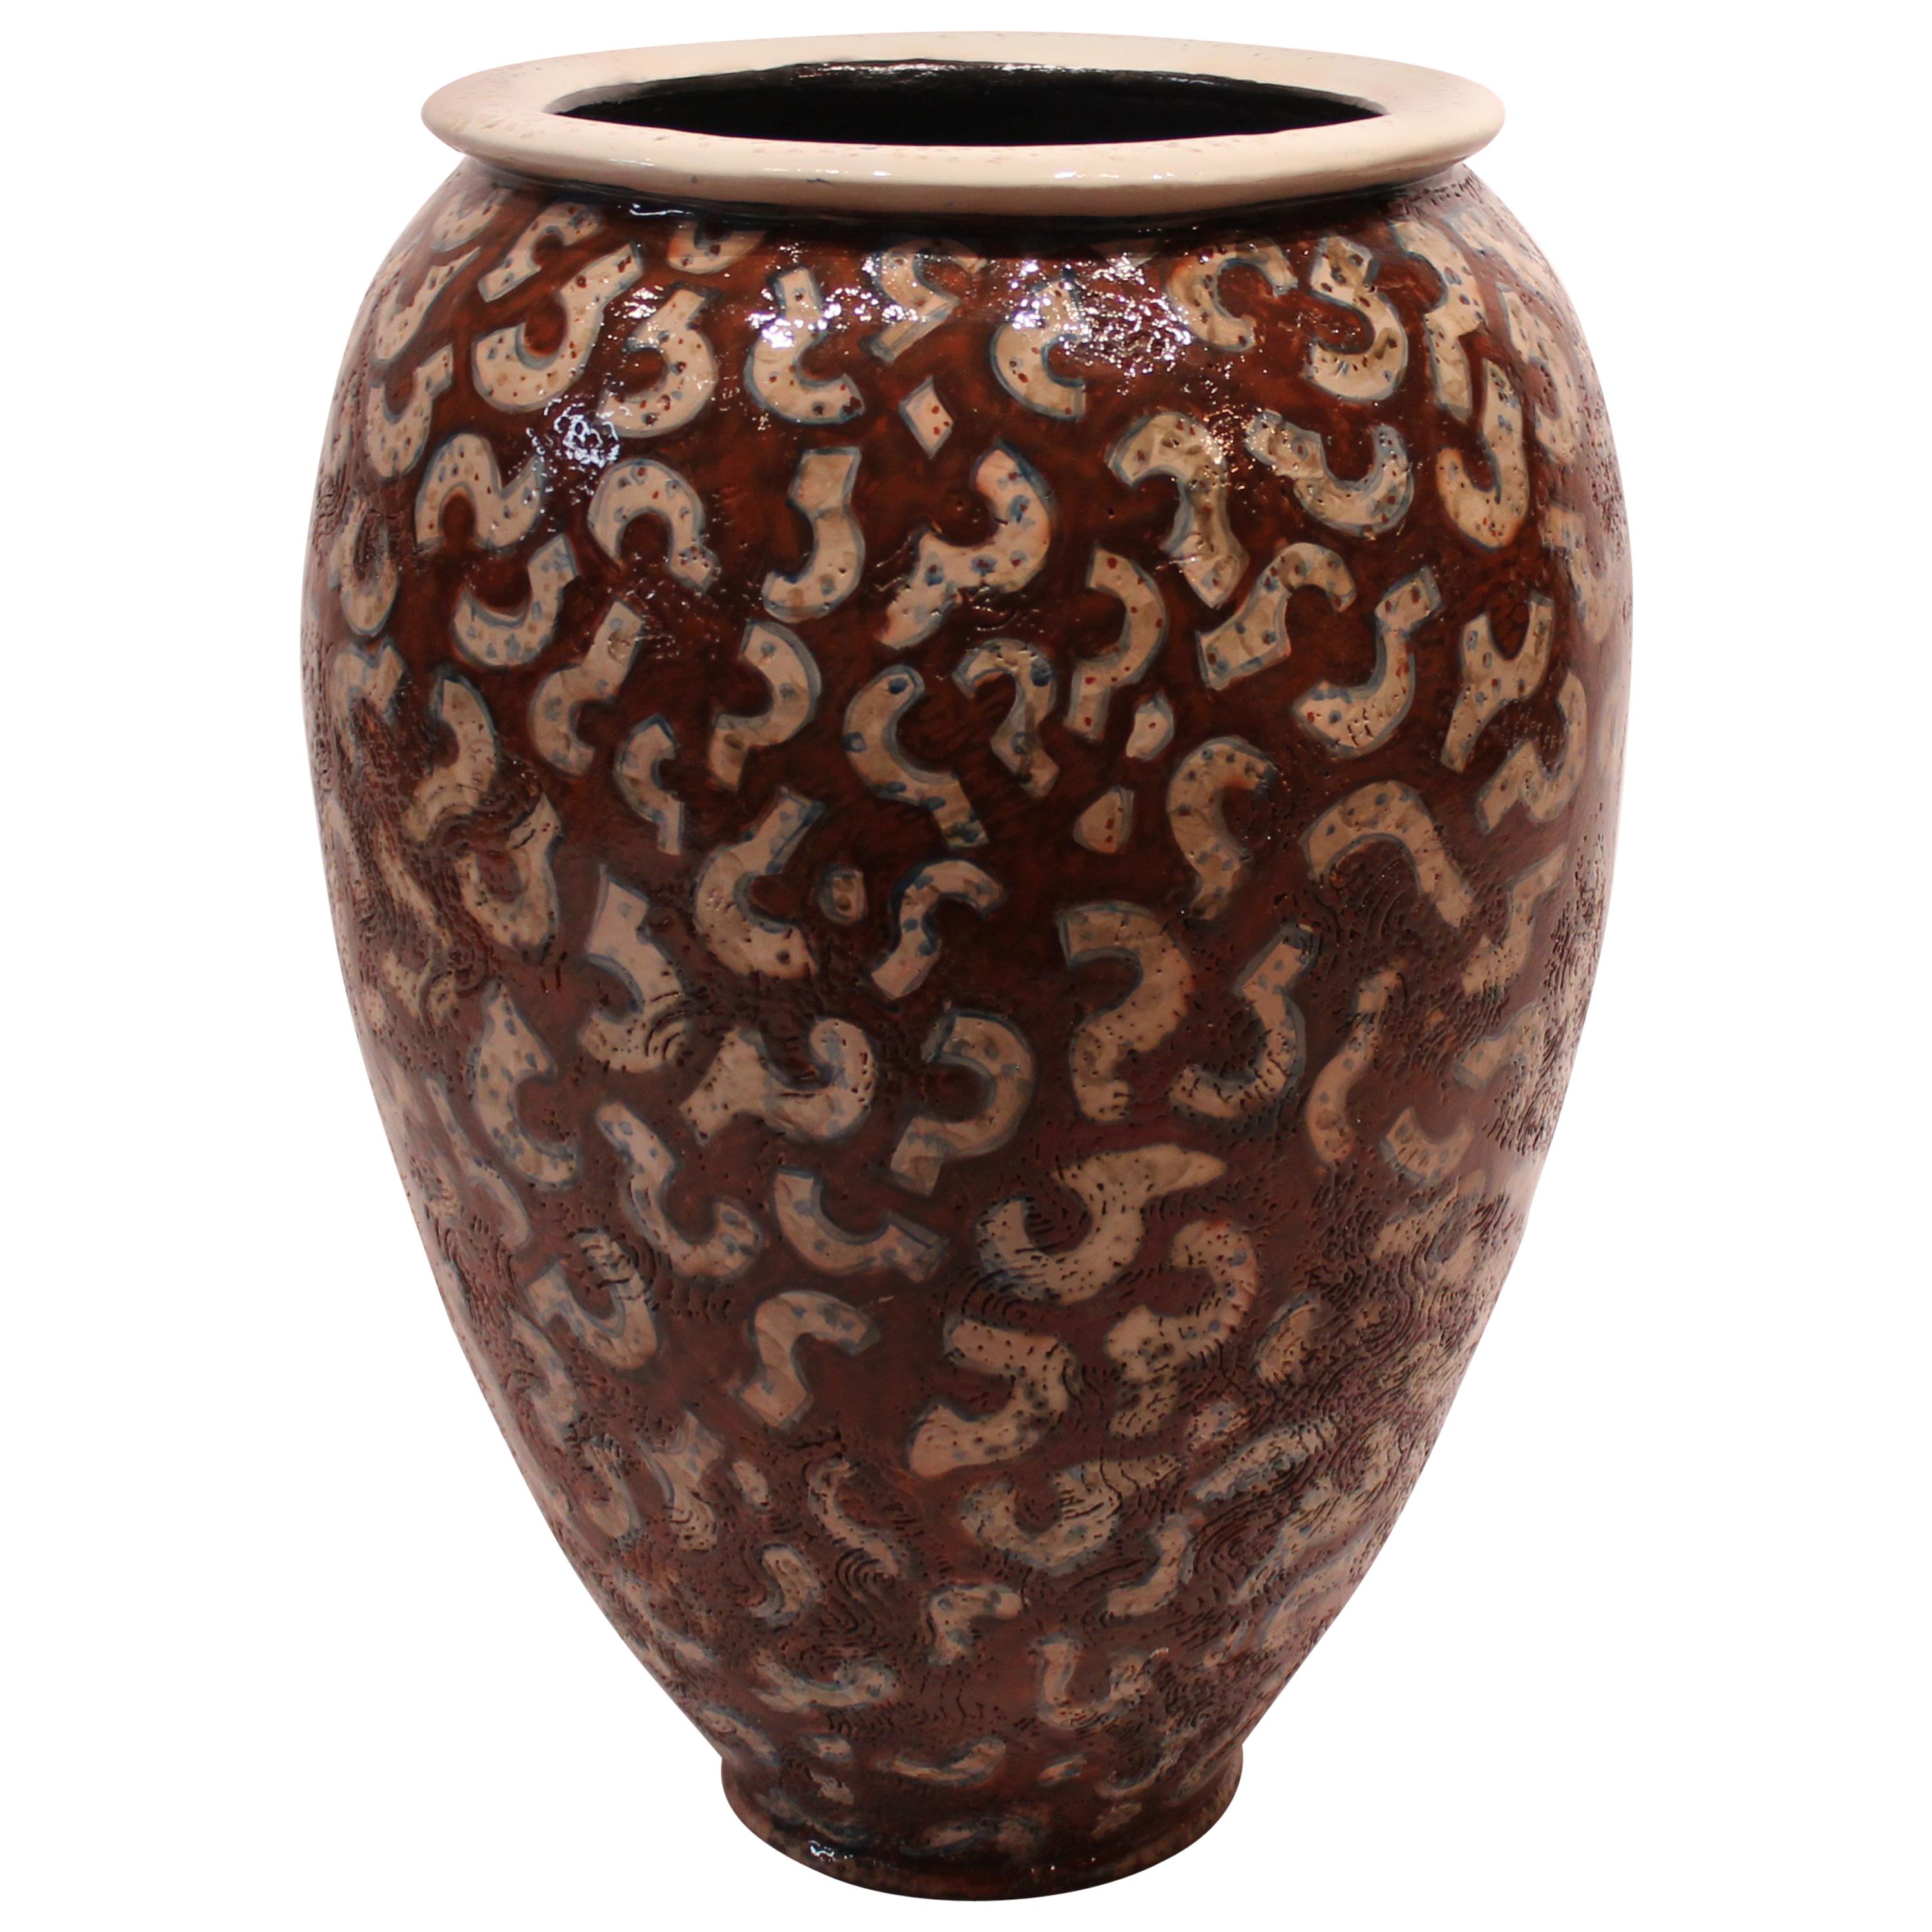 Large Stoneware Floor Vase by the Danish Artist Per Weiss from the 1980s